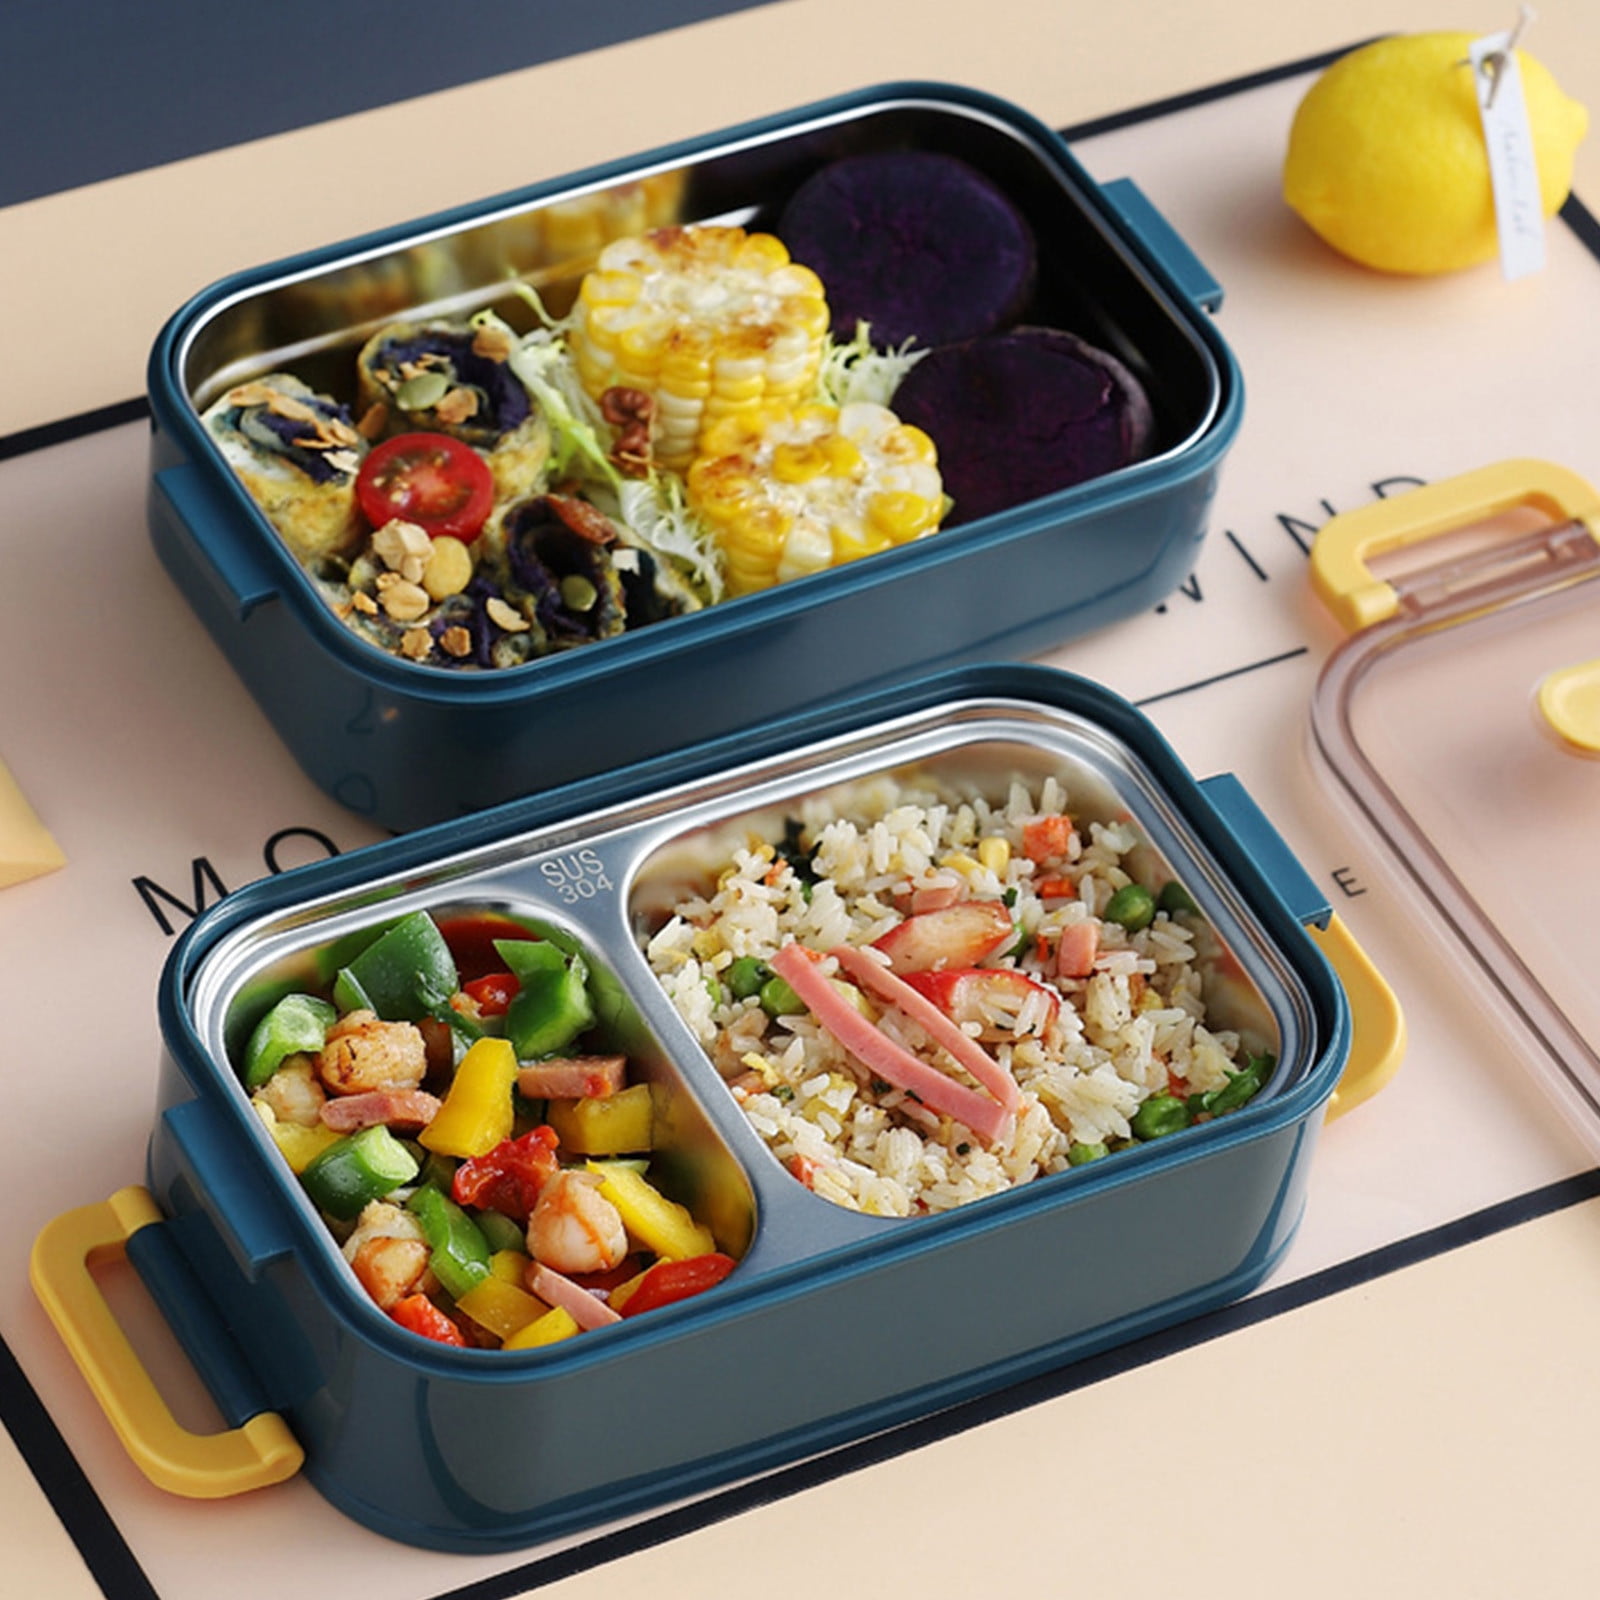 AURIGATE Bento Box,Stainless Steel Lunch Box,Versatile 4-Compartment  Portable Lunch Box Container-Salad Lunch Containers for Adults/Kids with  Soup